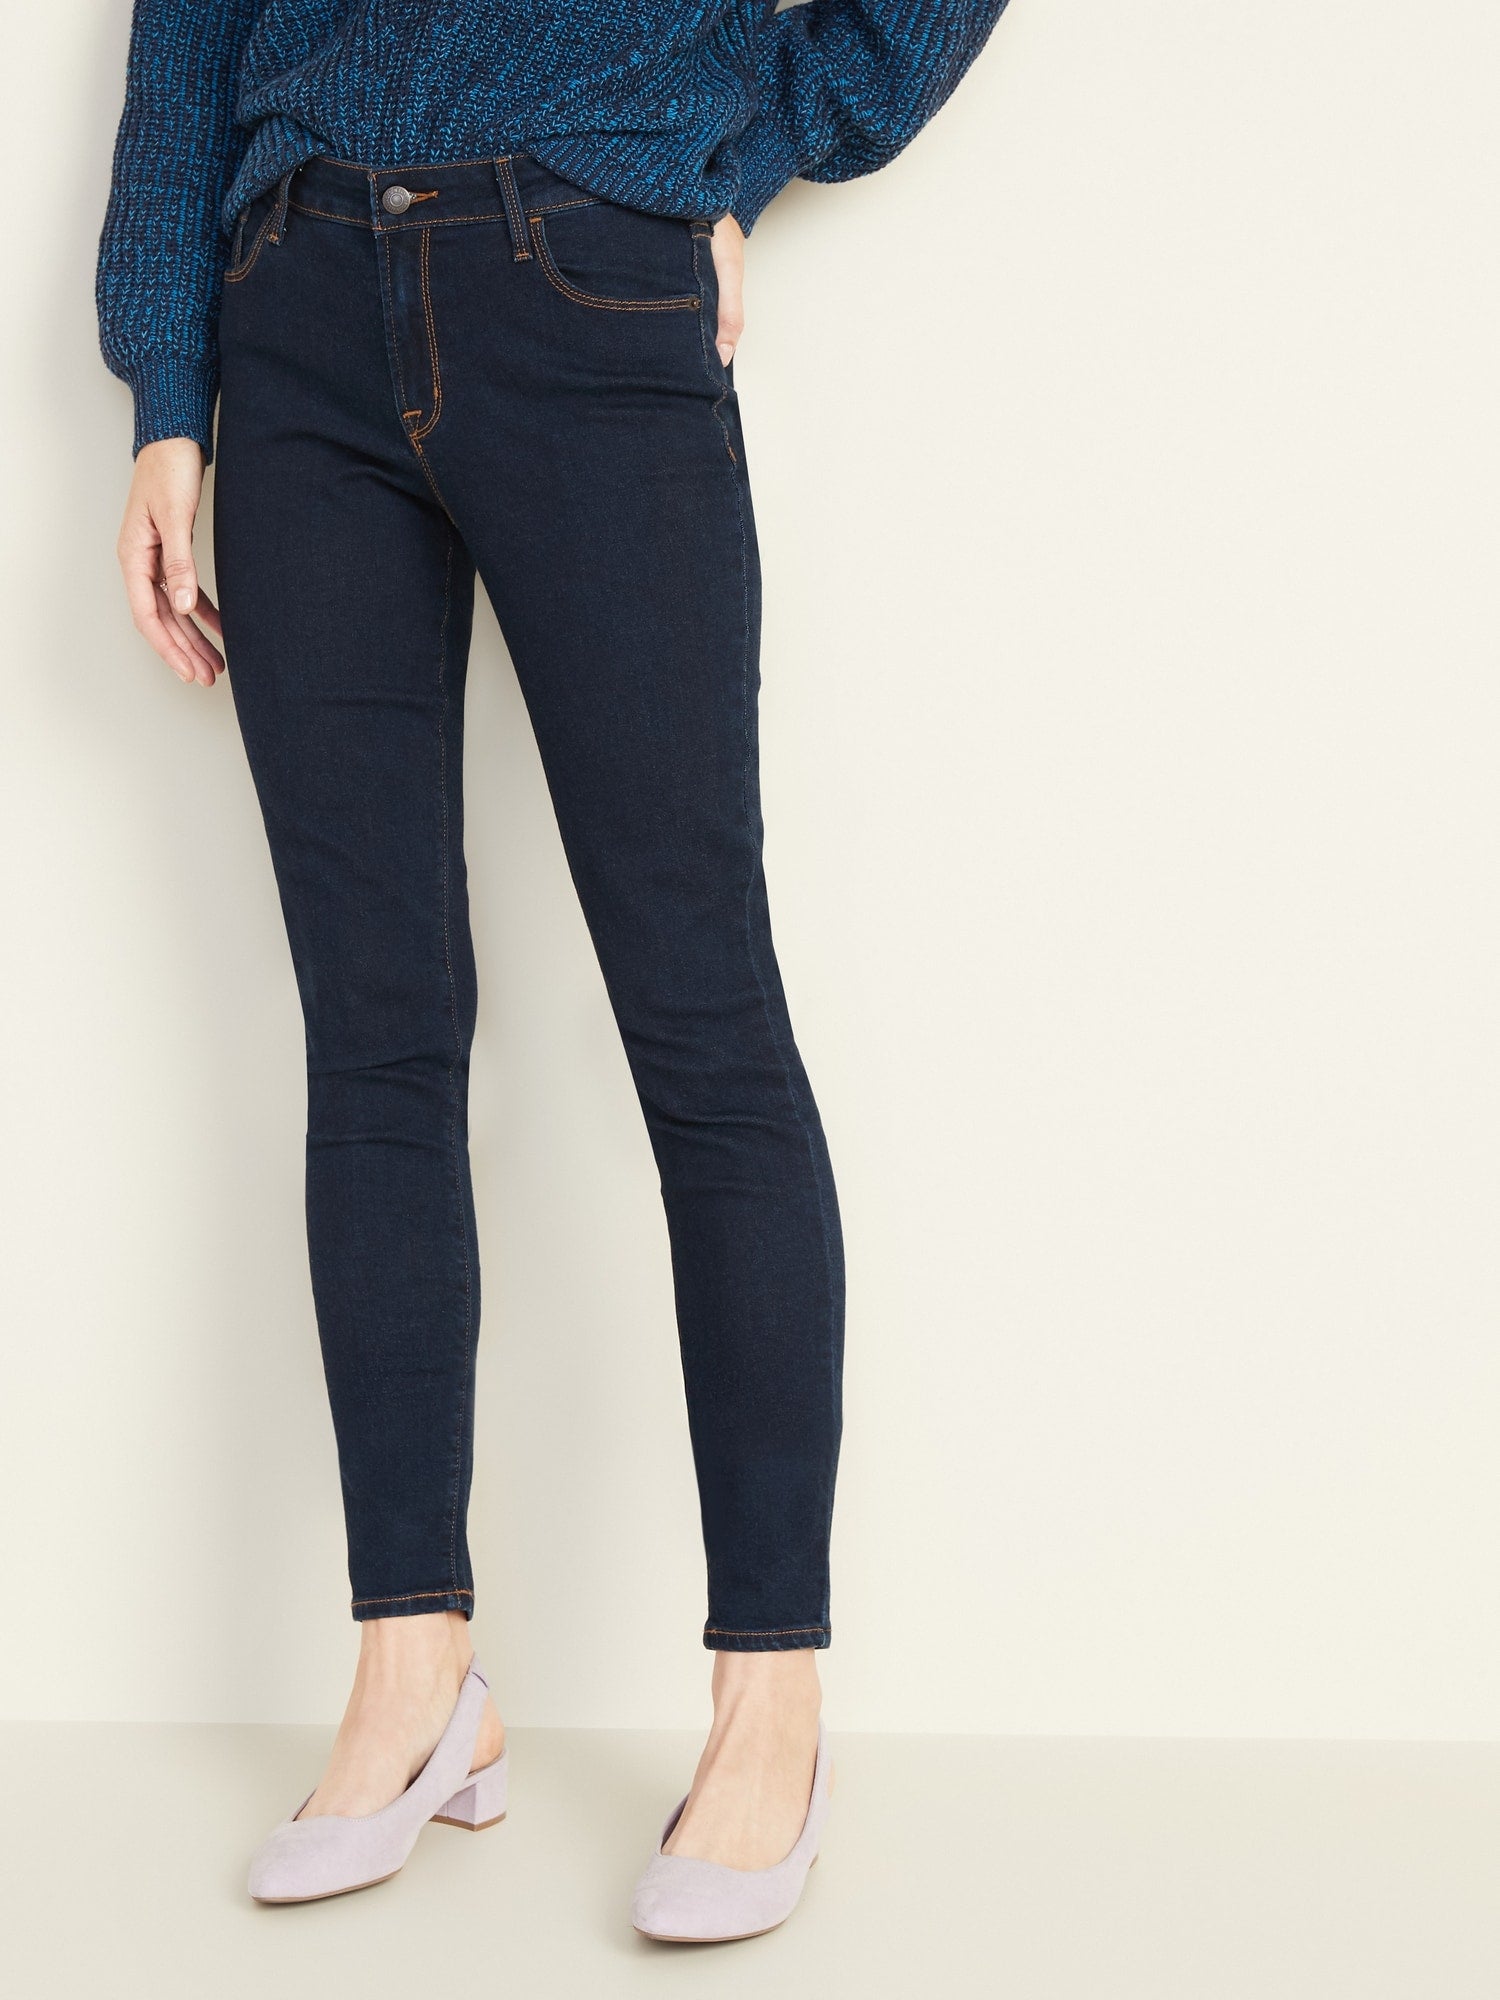 Mid-Rise Power Slim Straight Dark-Wash Jeans for Women - Old Navy  Philippines